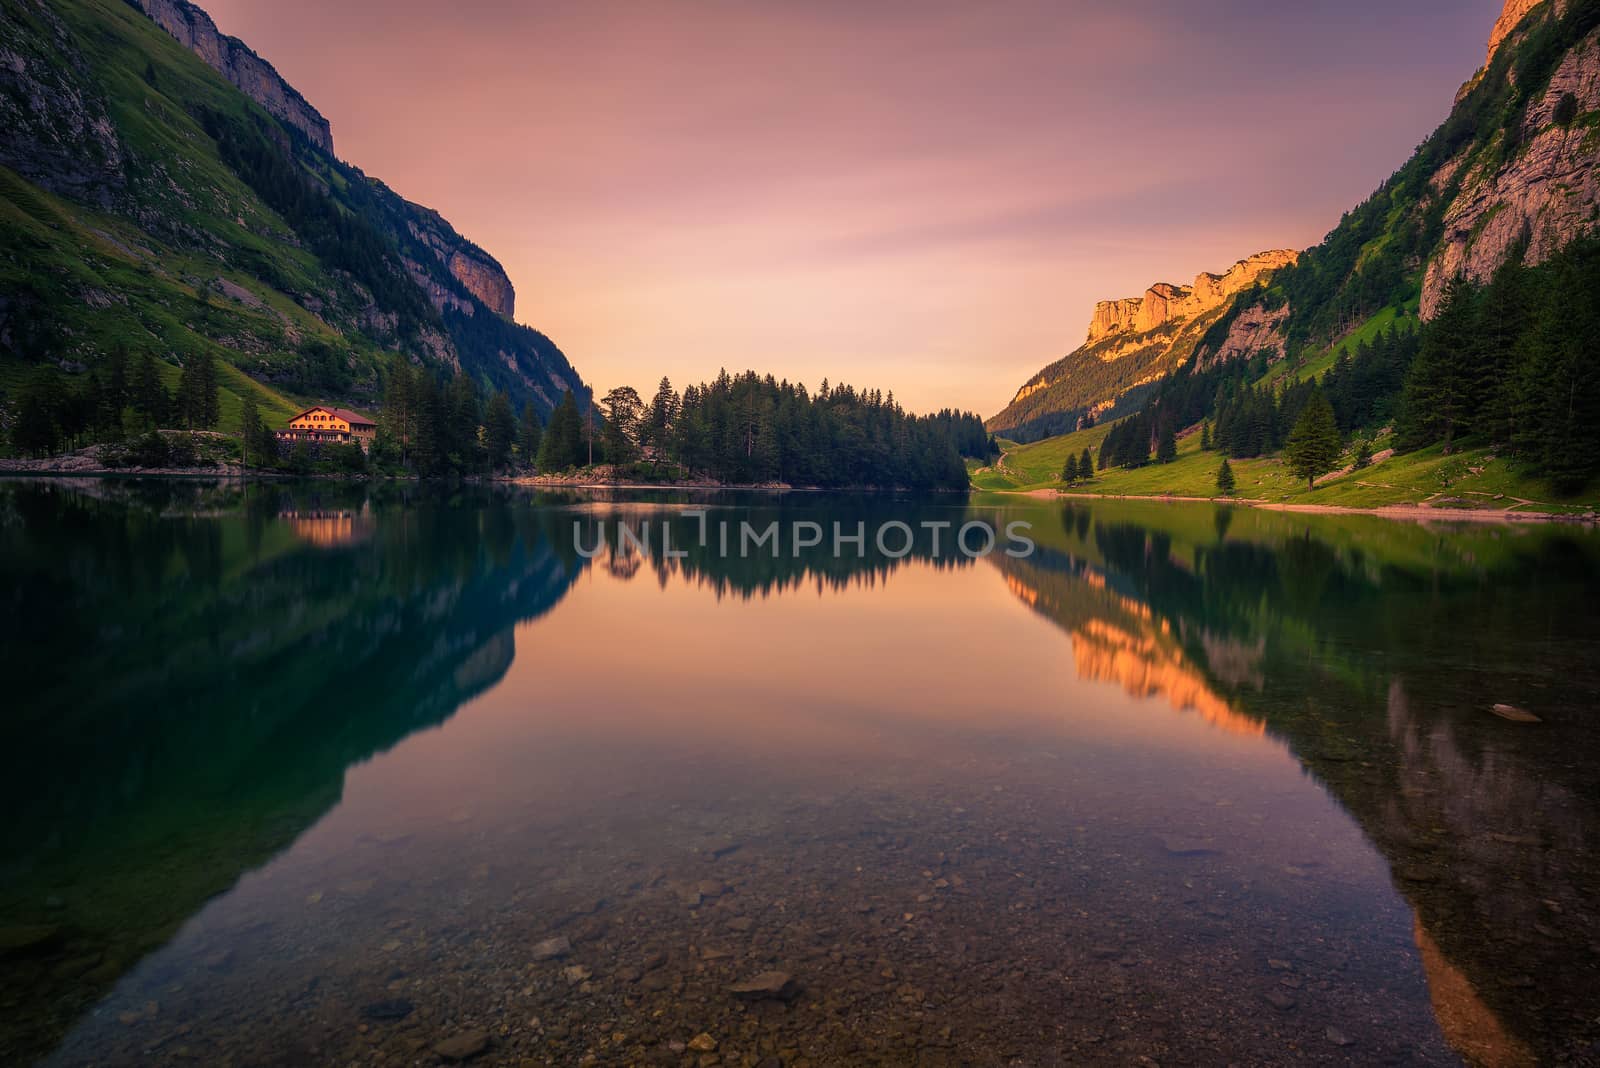 Sunset over the Seealpsee lake in the Swiss Alps, Switzerland by nickfox